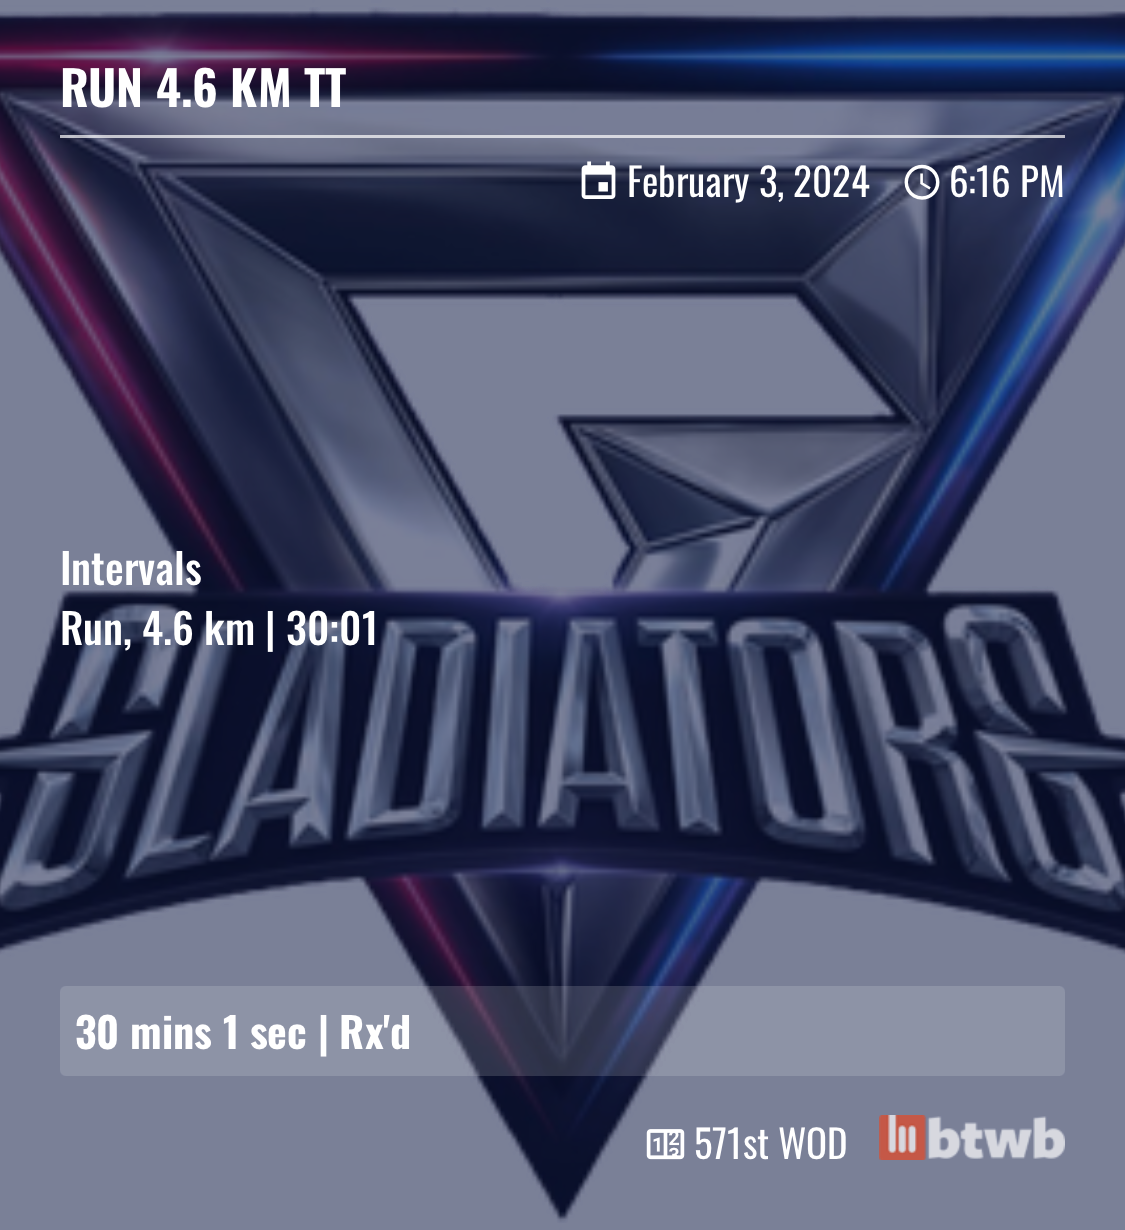 Workout of 4.6km run in 30minutes over the new Gladiators logo